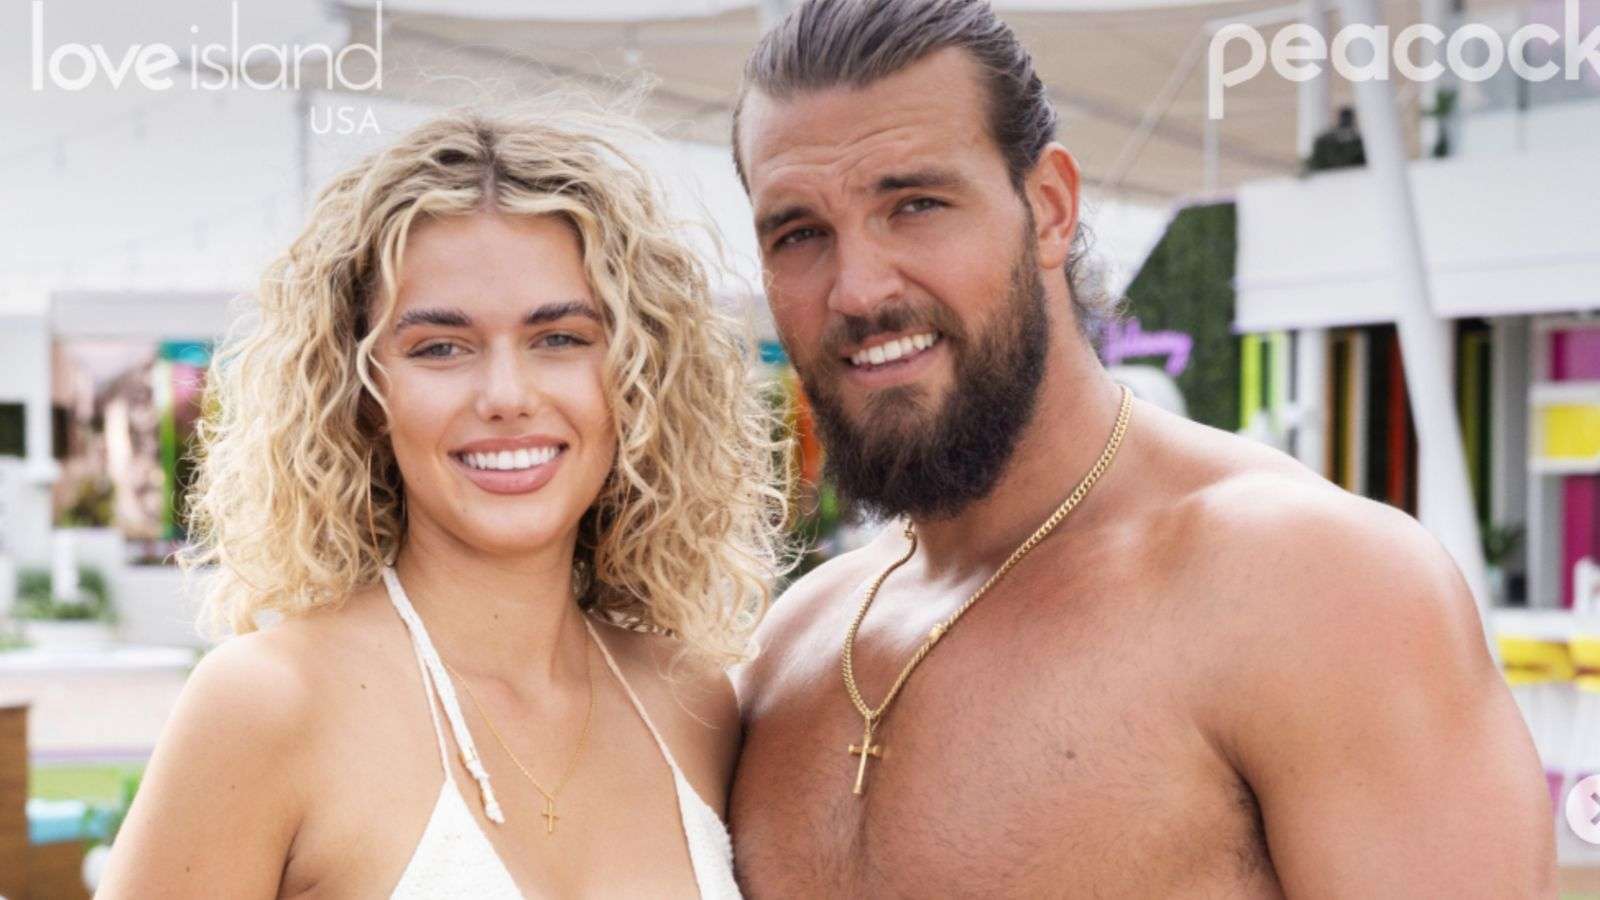 Carmen and Victor from Love Island USA